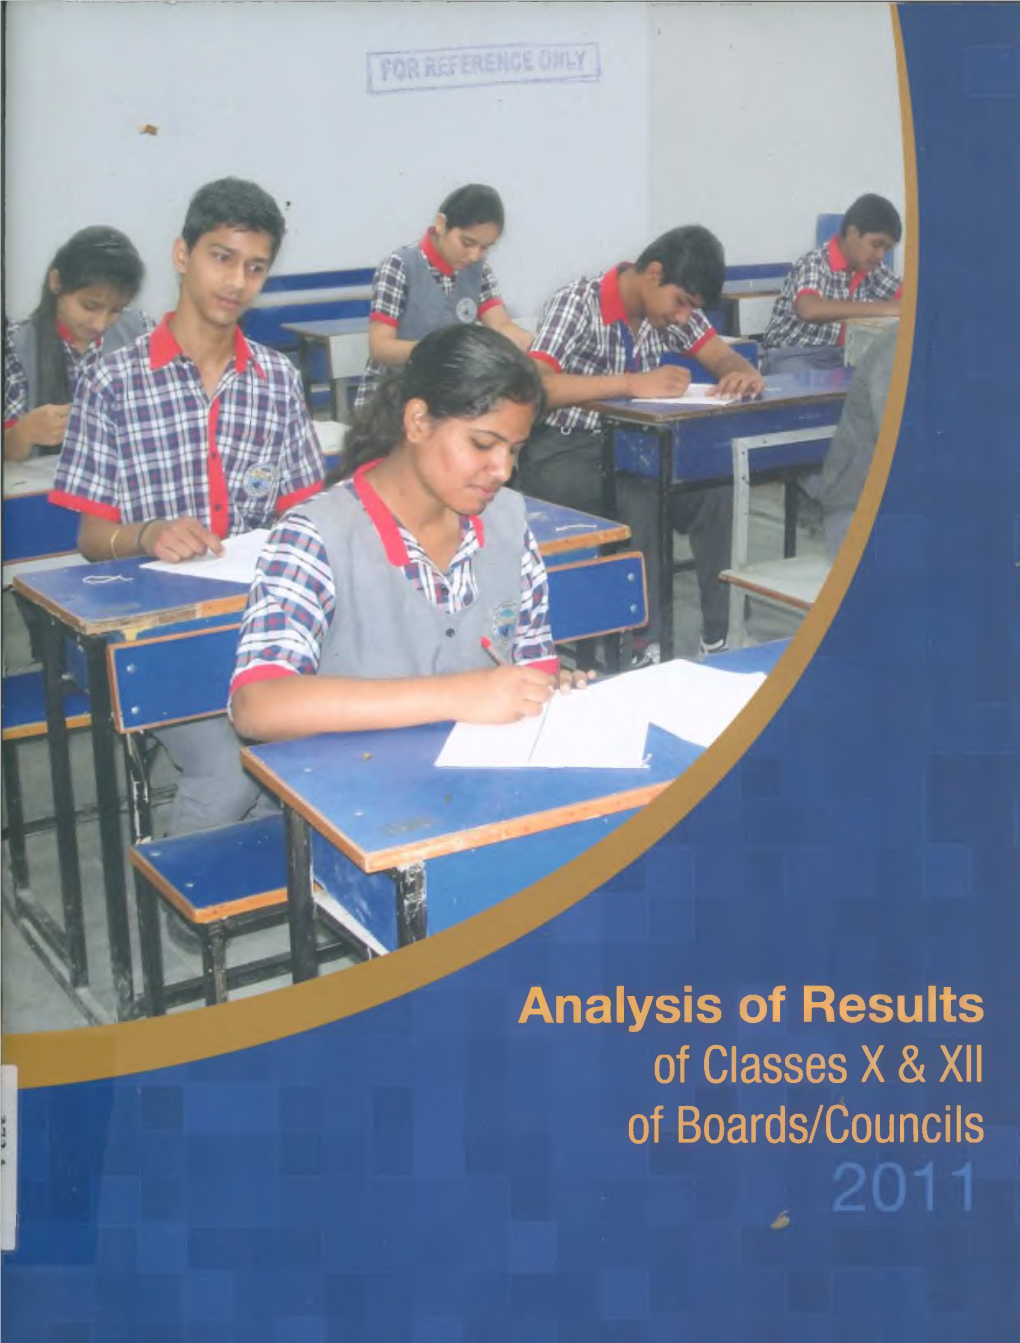 Analysis of Results of Classes X & XII of Boards/Councils